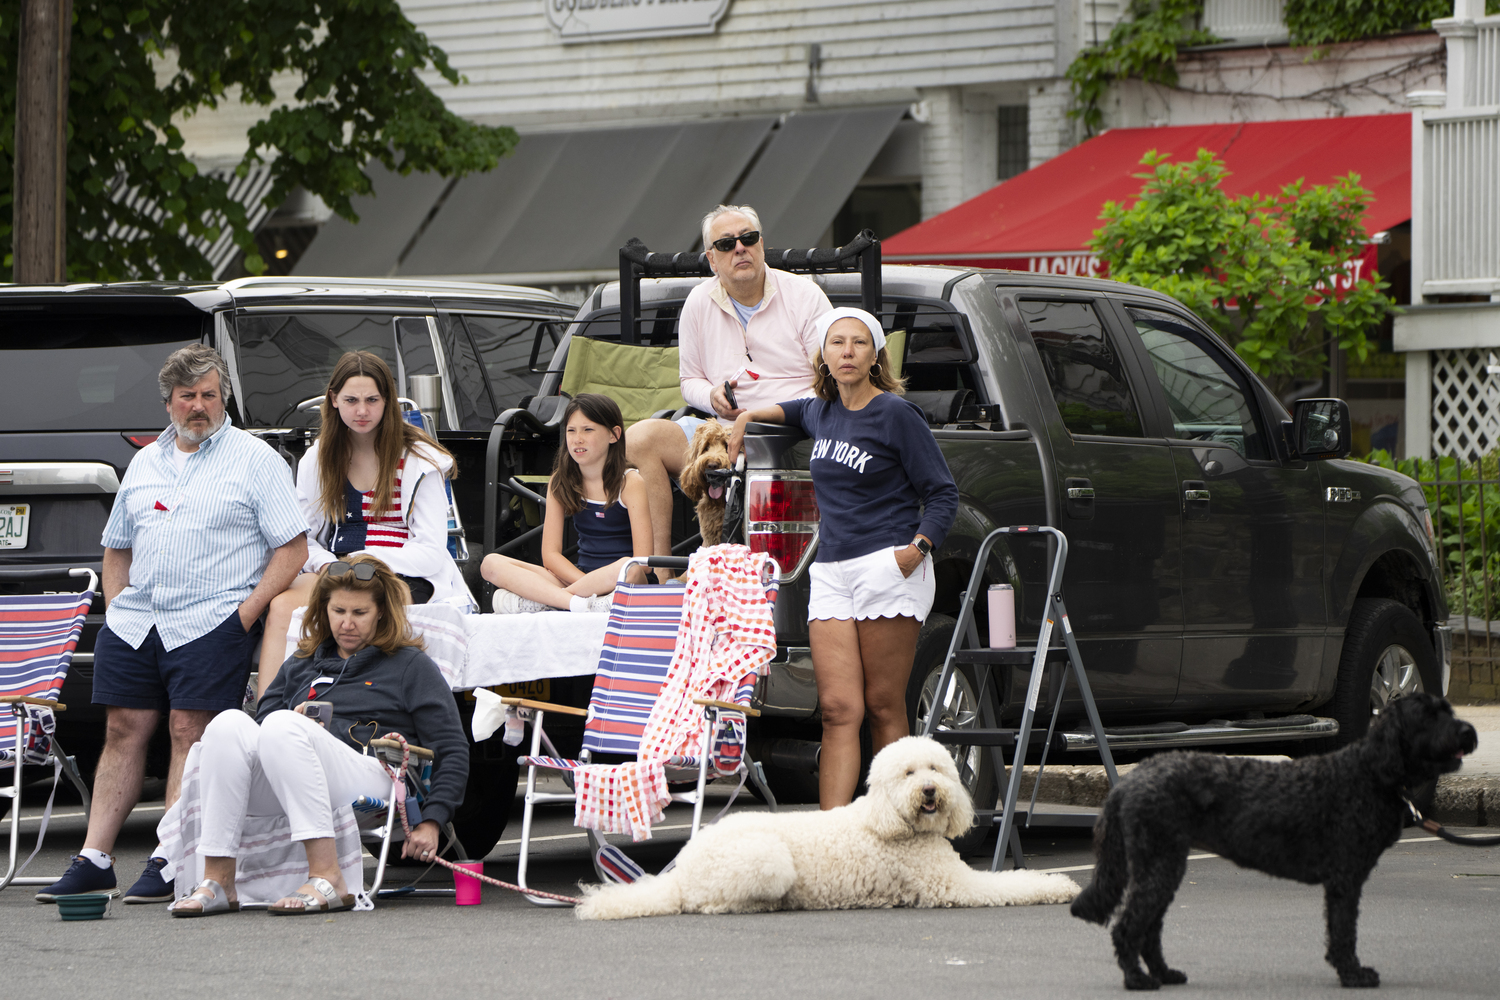 A family watches the Sag Harbor Memorial Day parade on Main Street. LORI HAWKINS